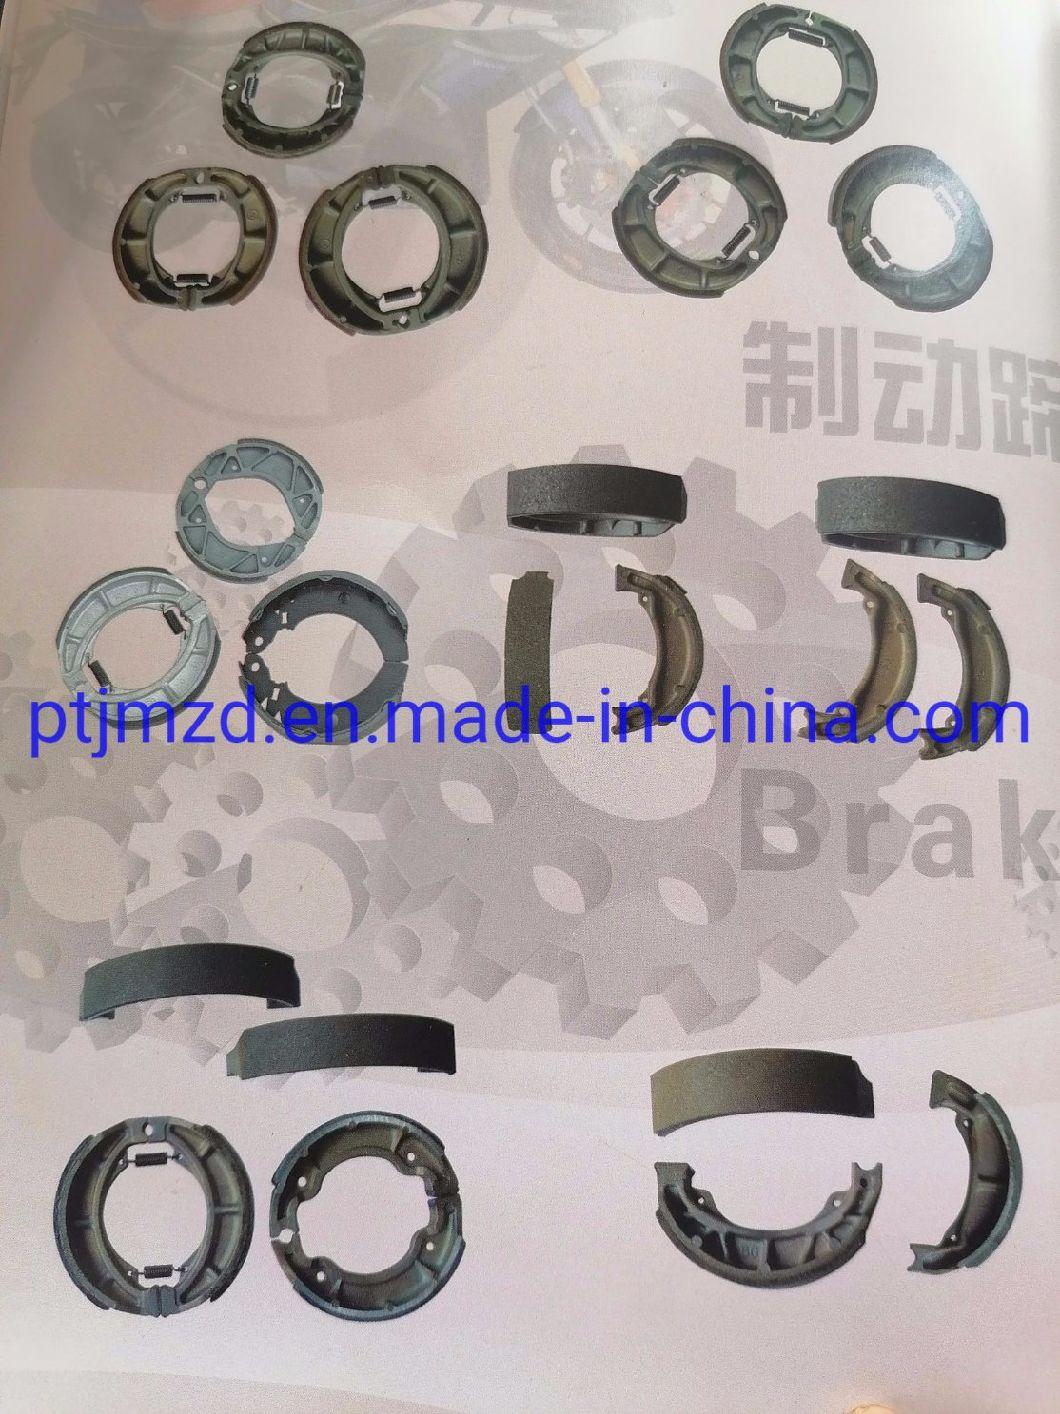 Motorcycle Brake Shoes. Motorcycle Parts, Auto Spare Part--Qj50q-G